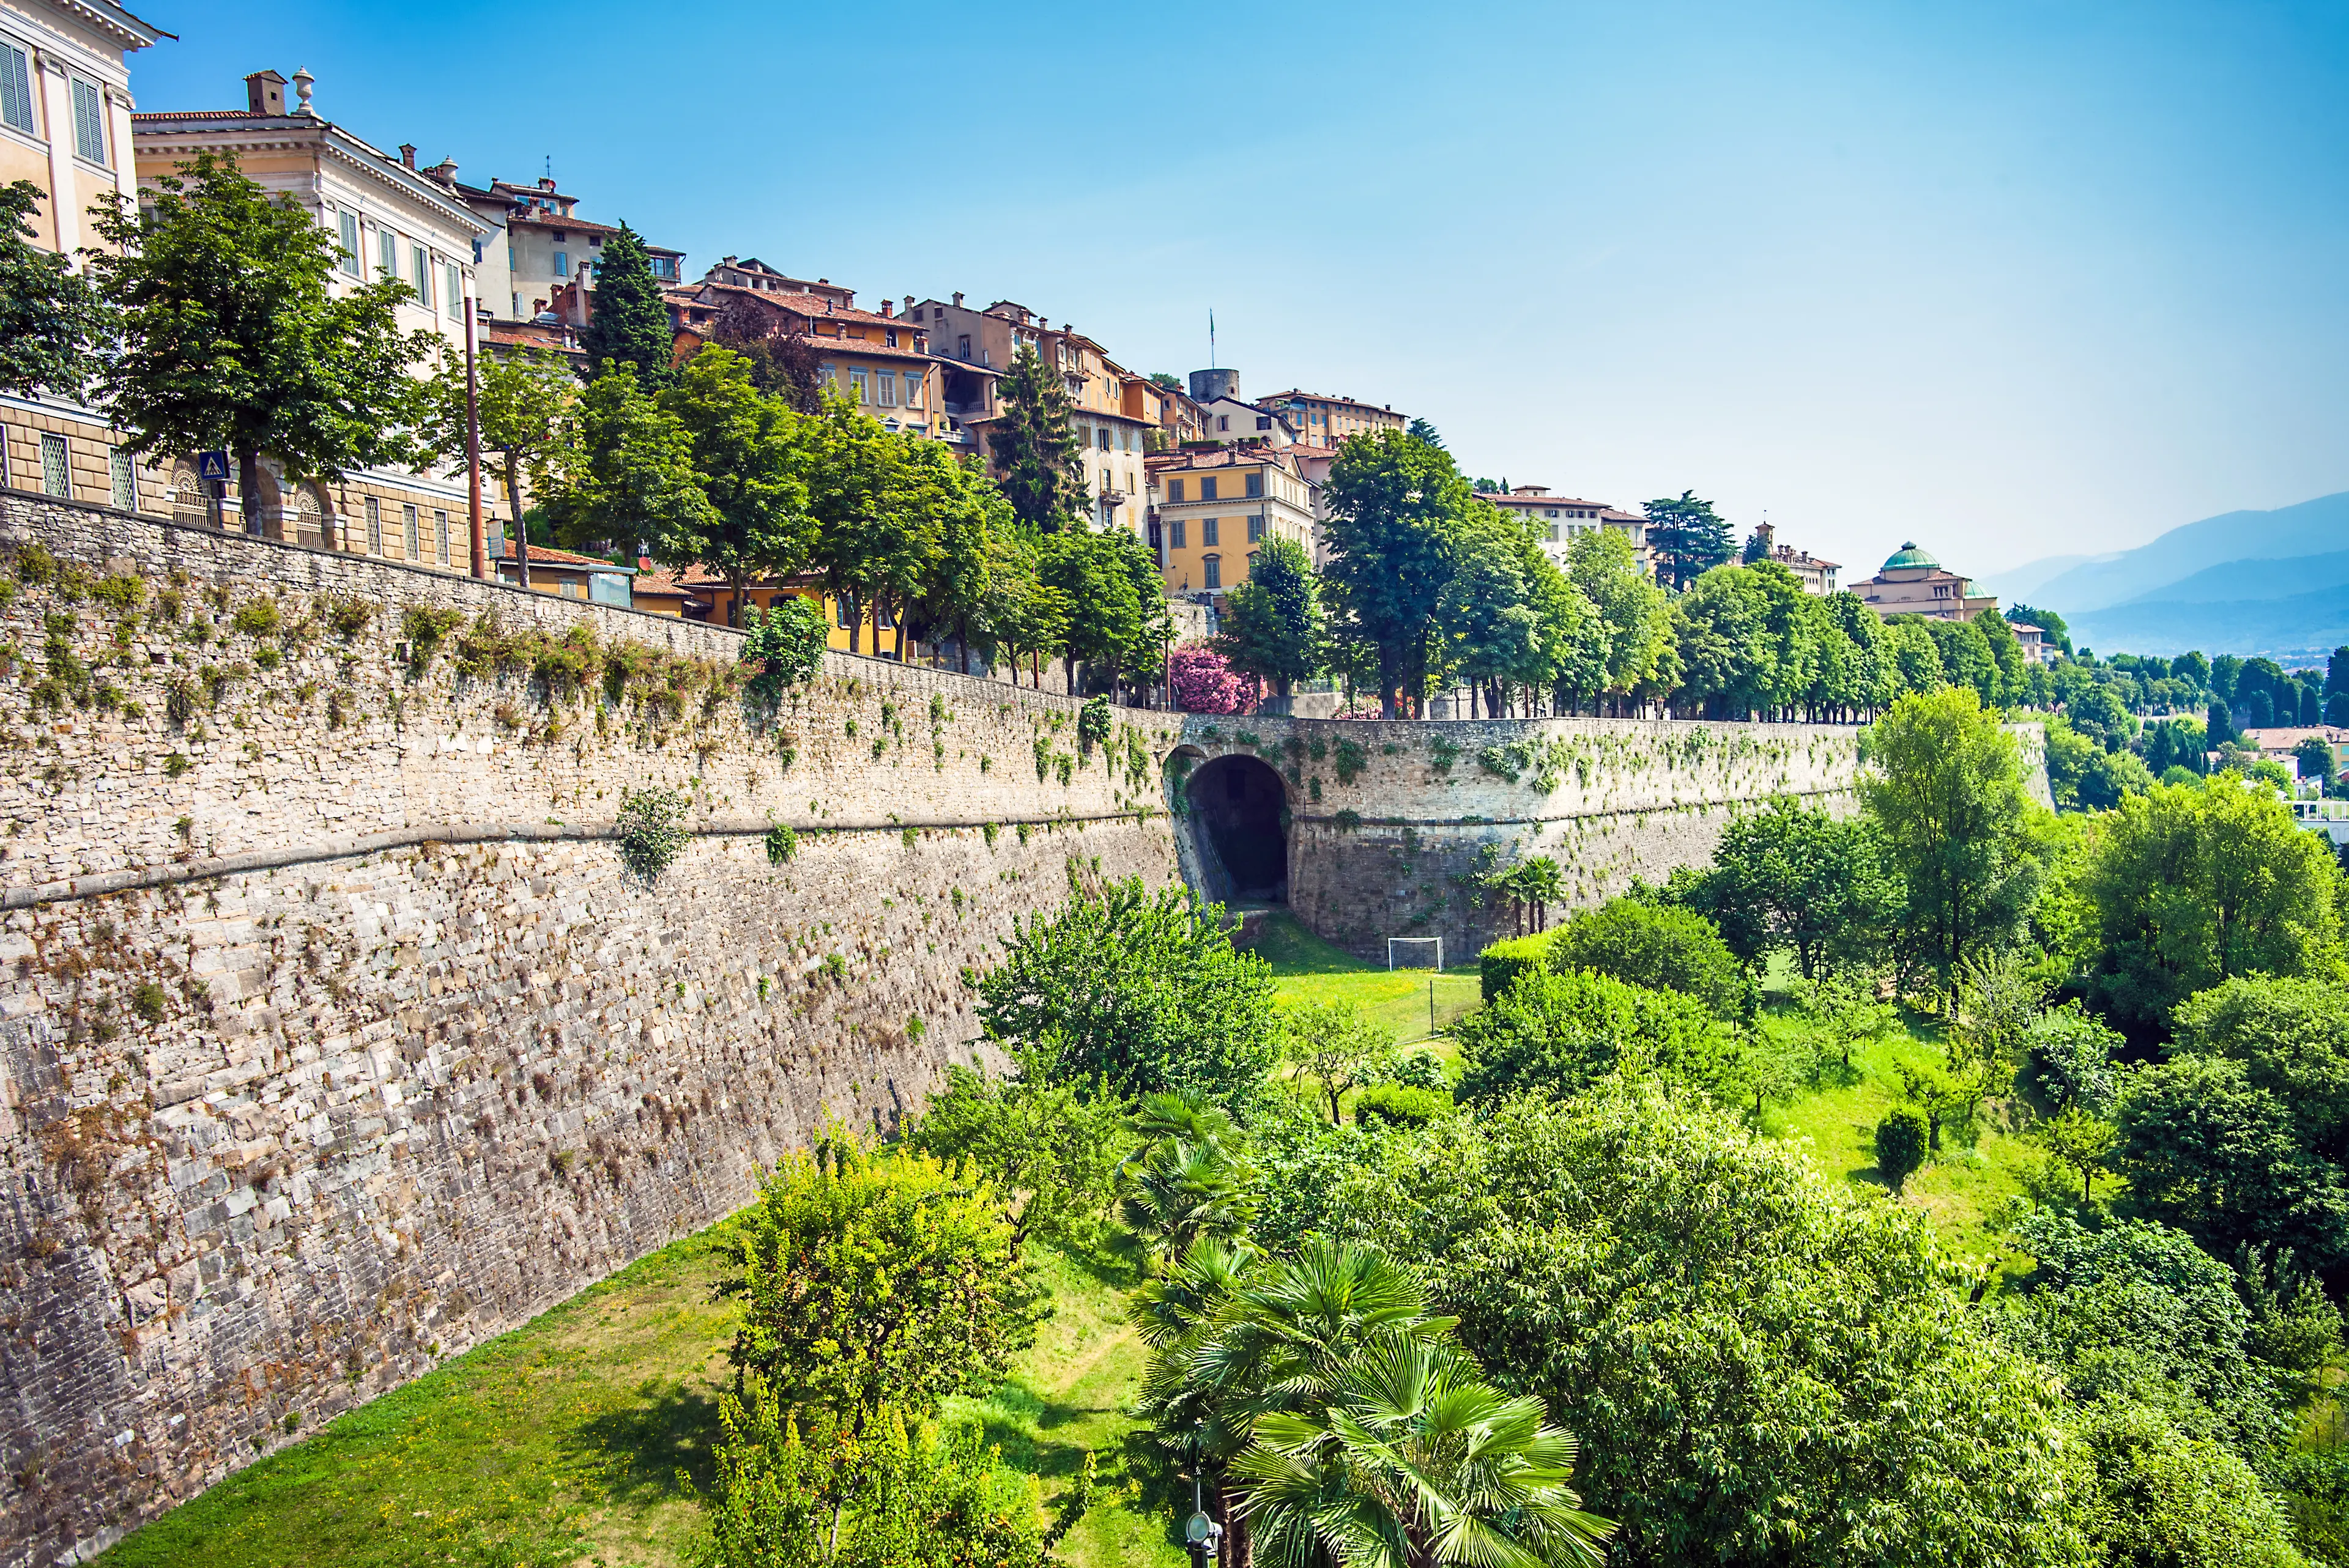 2-Day Solo Food, Wine, and Sightseeing Tour in Bergamo, Italy